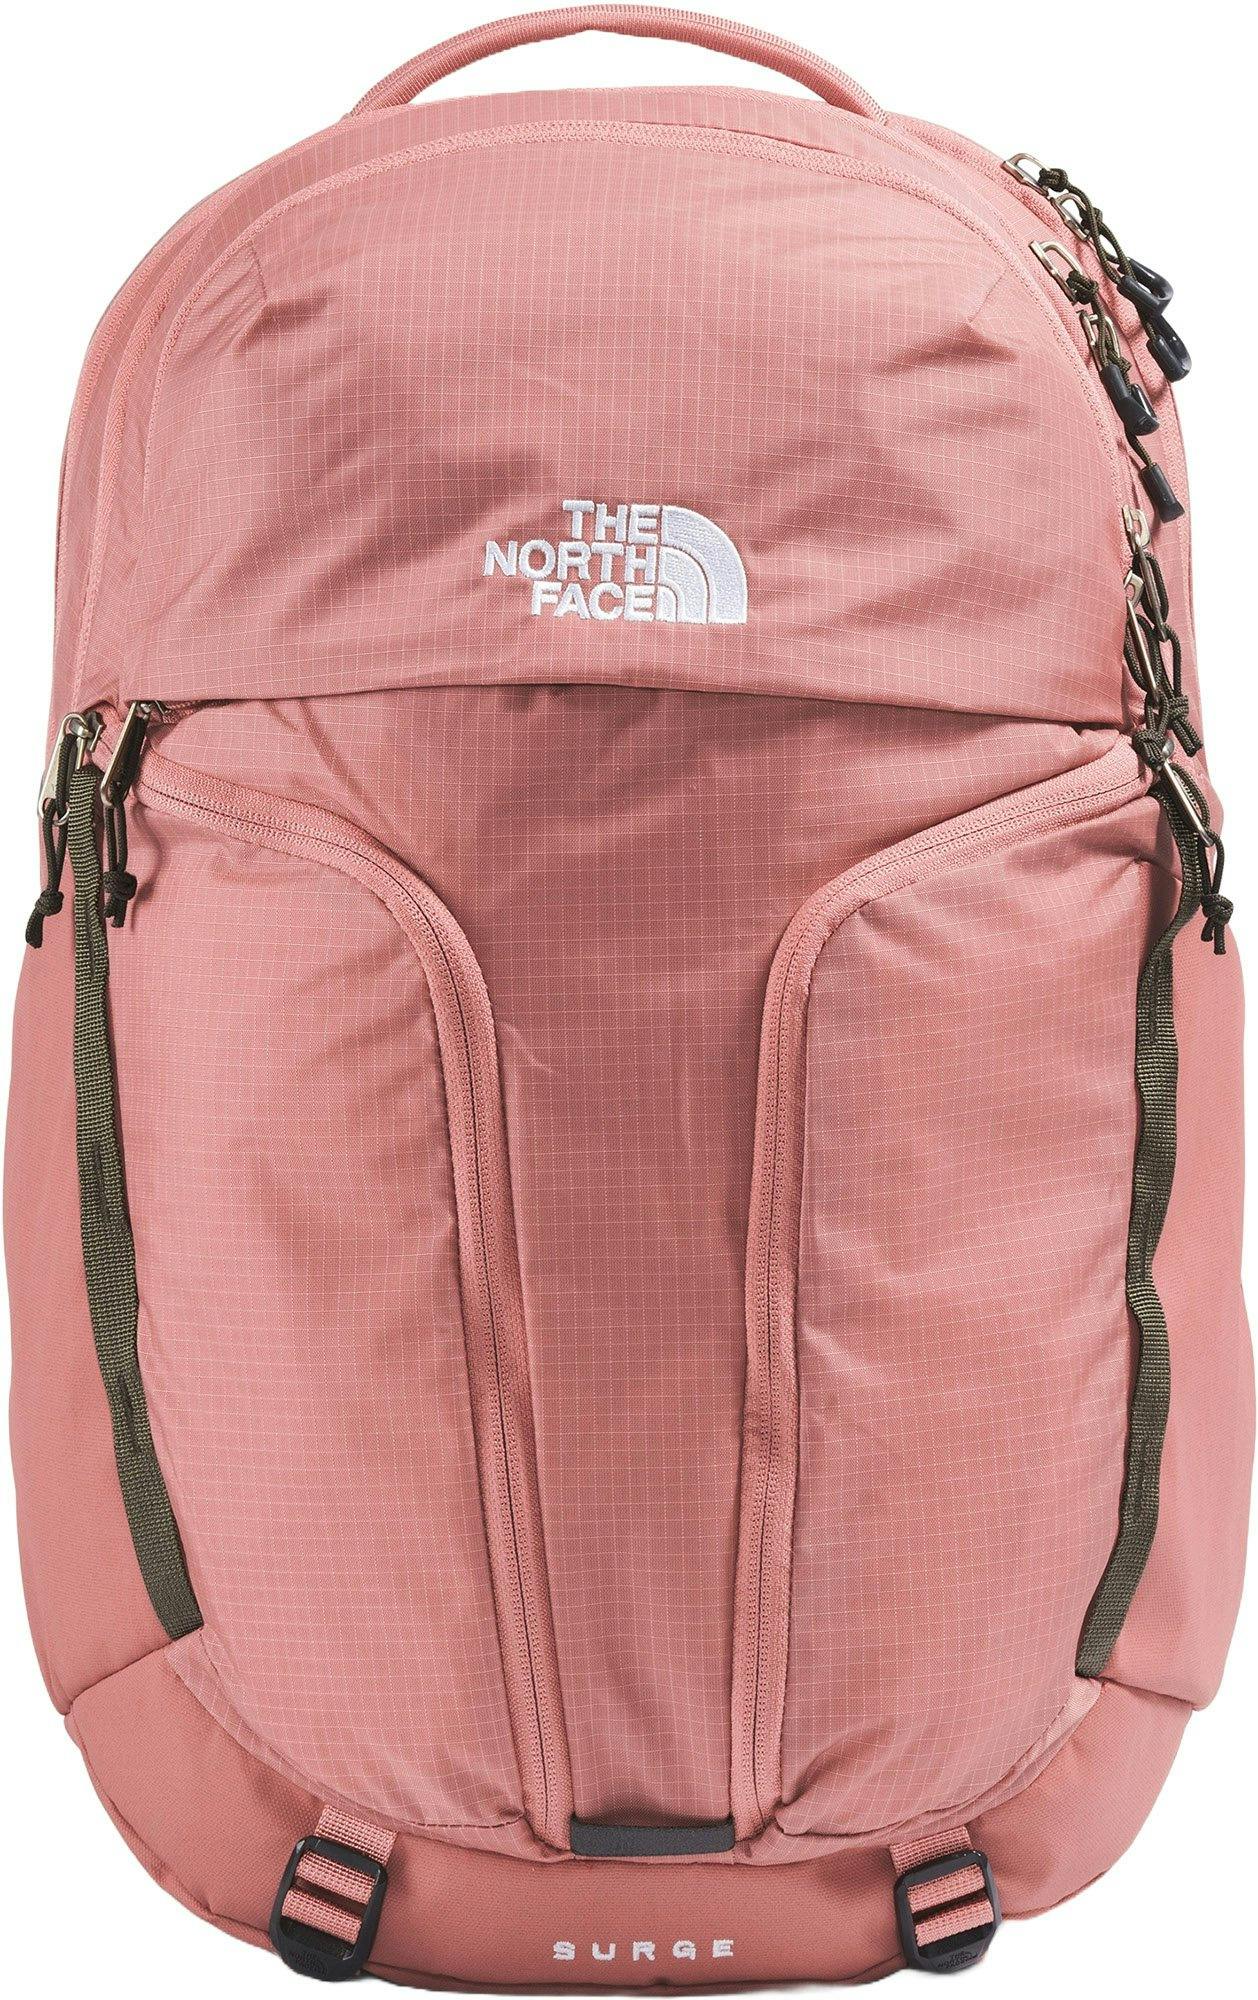 Product image for Surge Backpack 31L - Women's